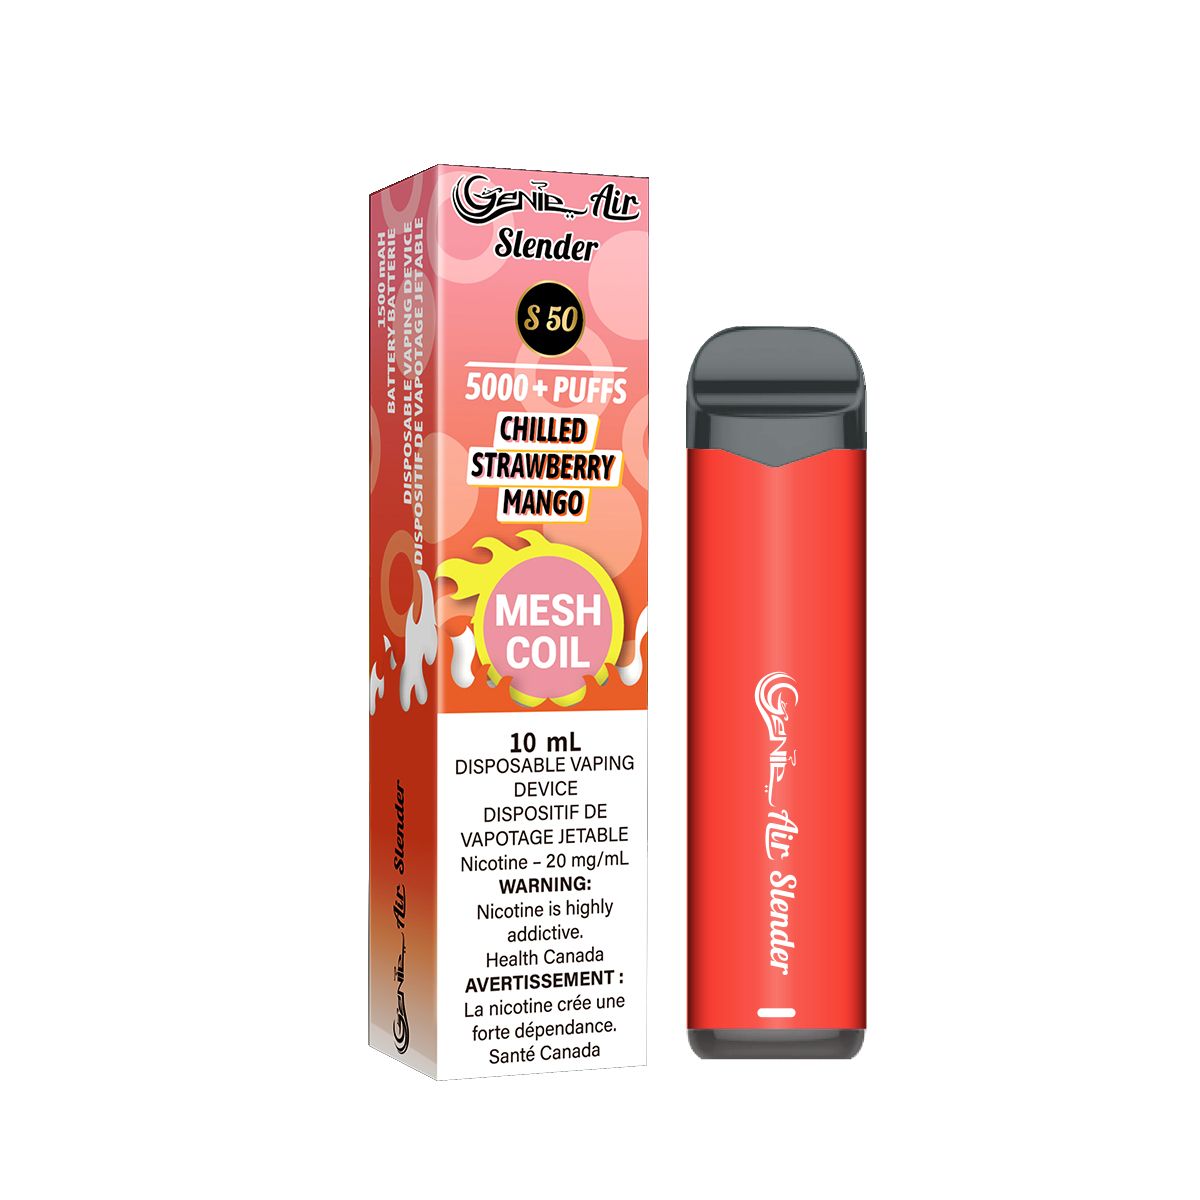 Chilled strawberry mango Genie slender 5000 Puffs per 1 disposable device  Fully charged  2% Salt Nicotine  Battery: 1500 mAh  Mesh Coil Technology s50